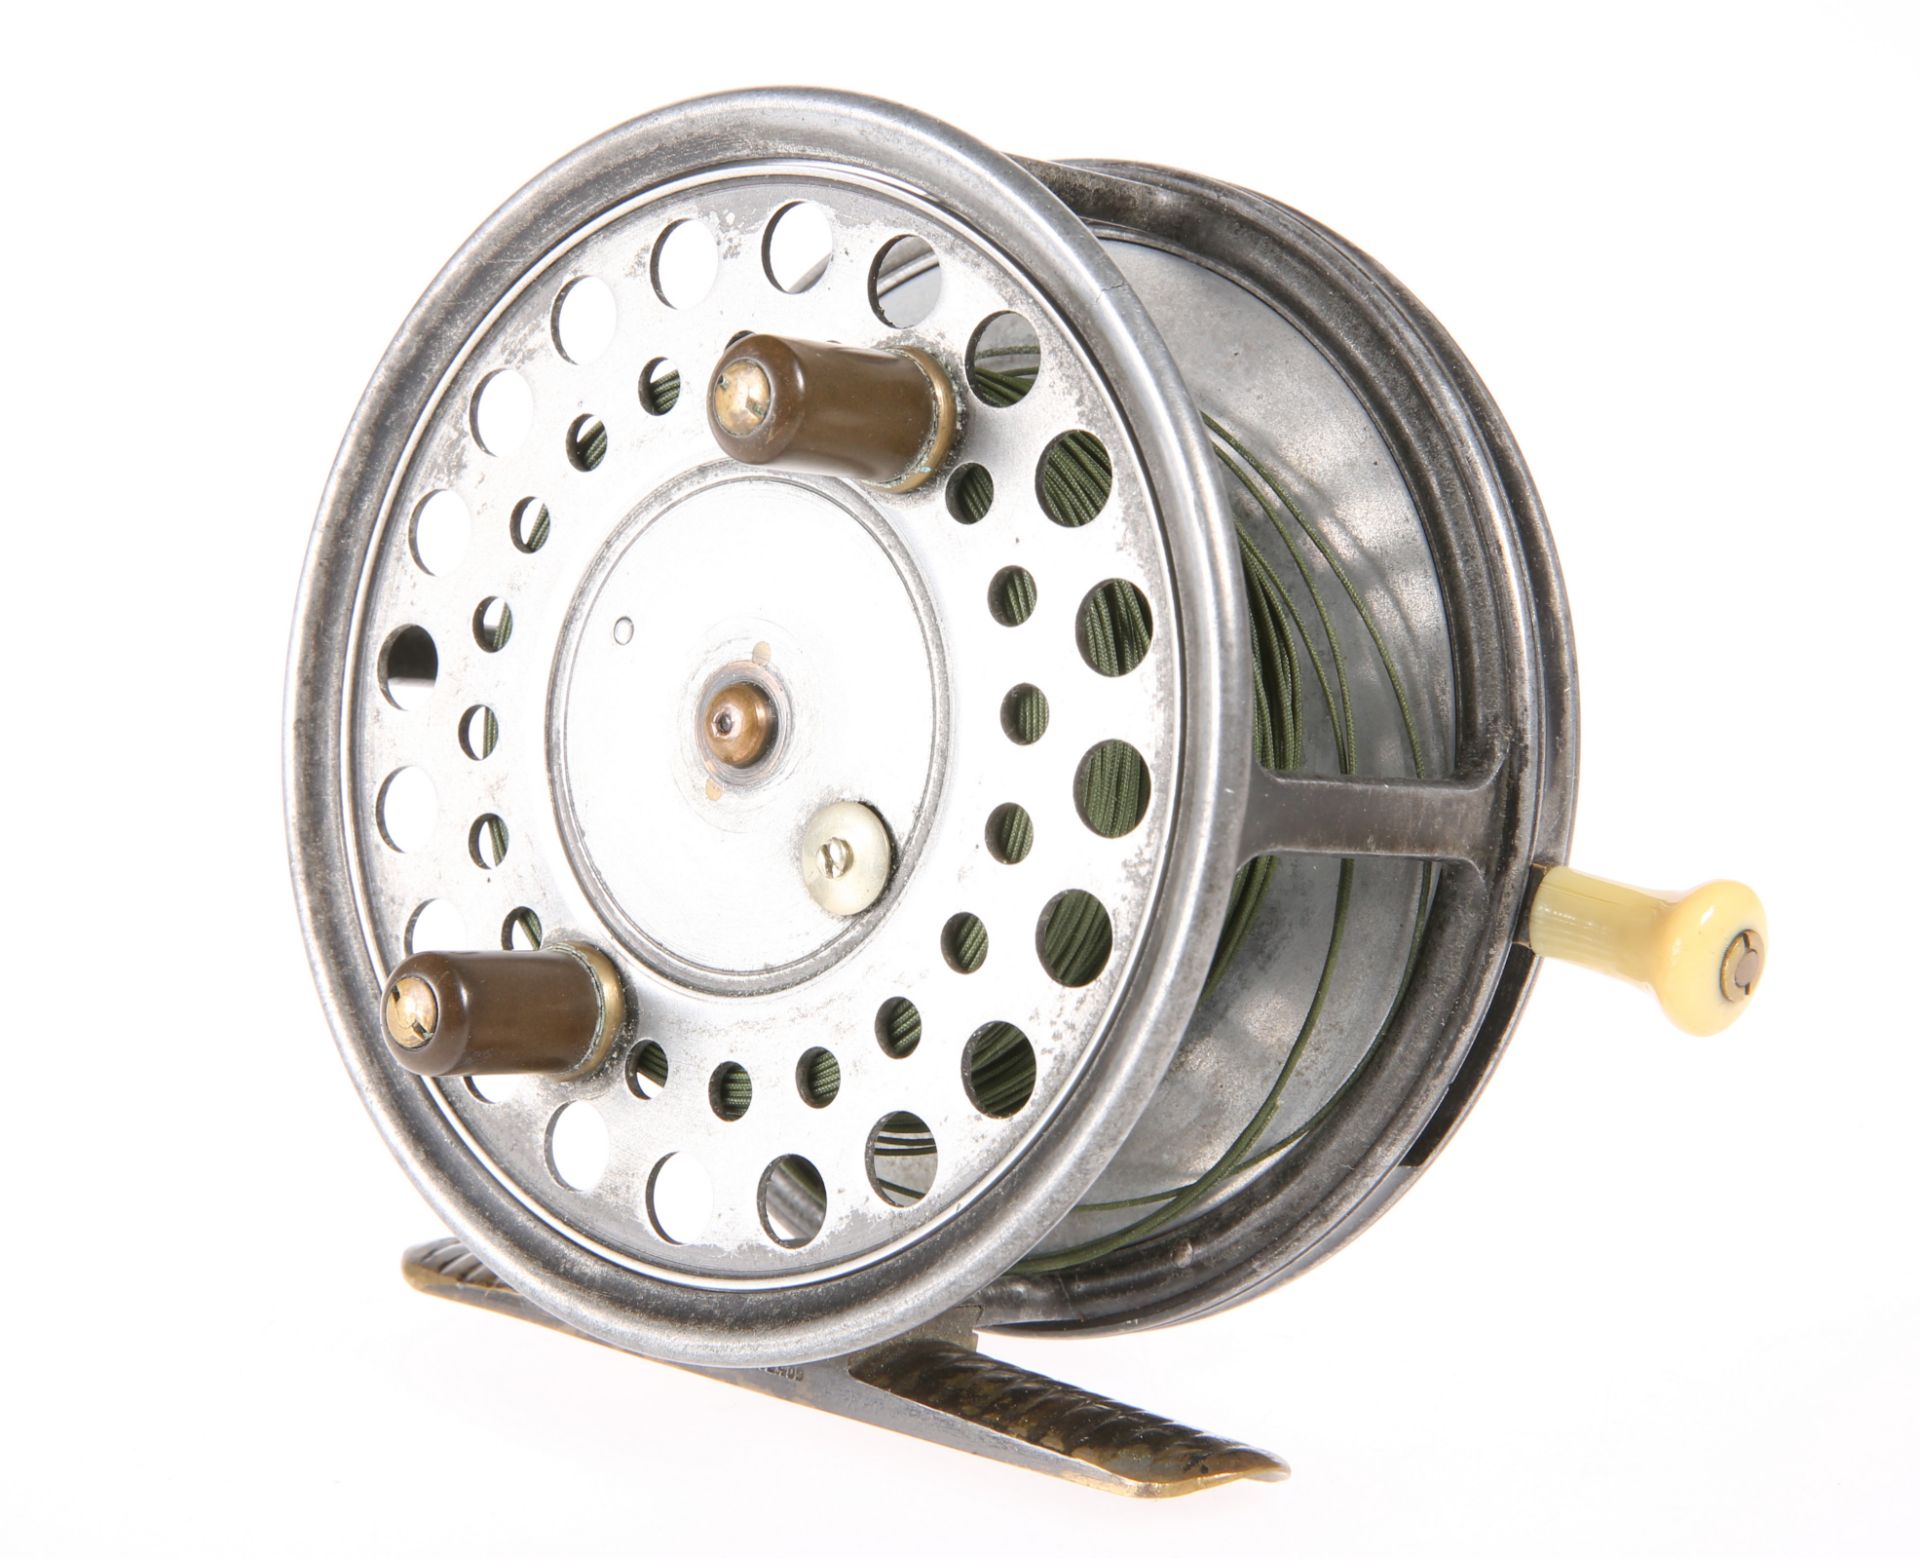 FISHING: A VINTAGE HARDY'S 4 1/4" SALMON FLY REEL 'THE SILEX MAJOR', fully marked 'Made by Hardy